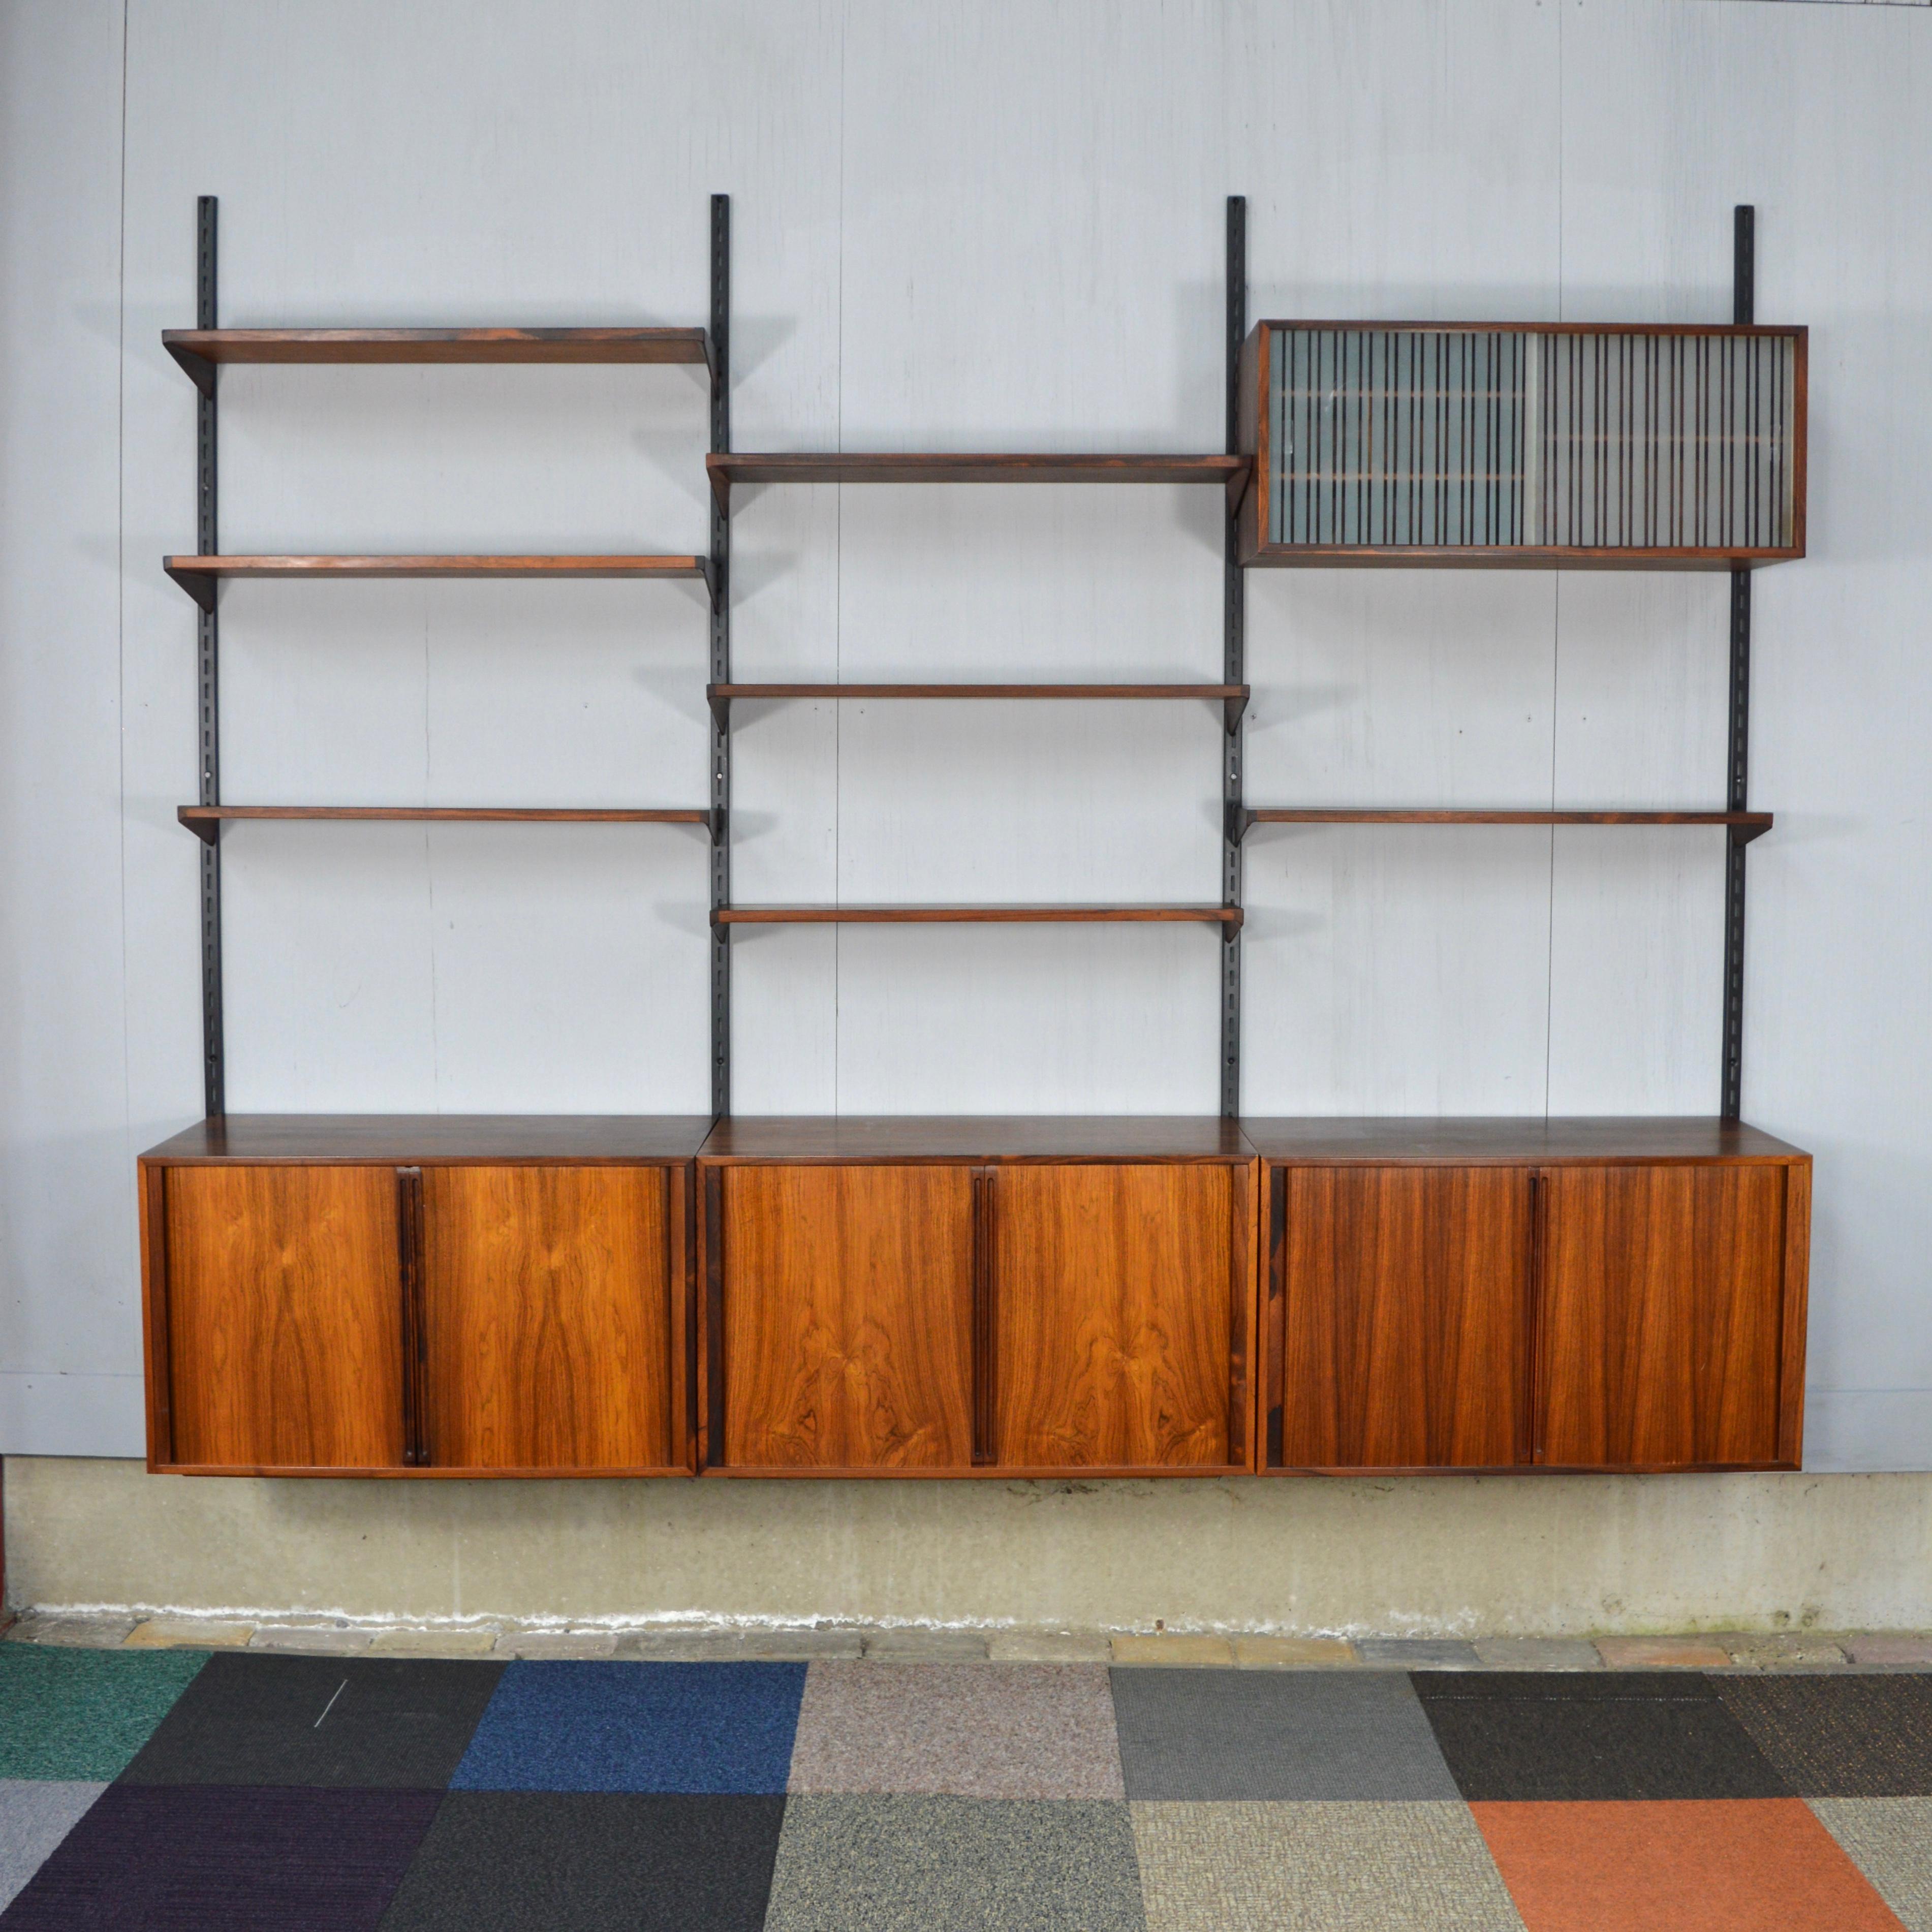 Brazilian rosewood wall unit by Kai Kristiansen for FM Møbler, Denmark.
The cabinets have sliding doors which are made of highly crafted lamellae that slide inside the cabinet.
Inside two of the cabinets there are two birchwood drawers lined with